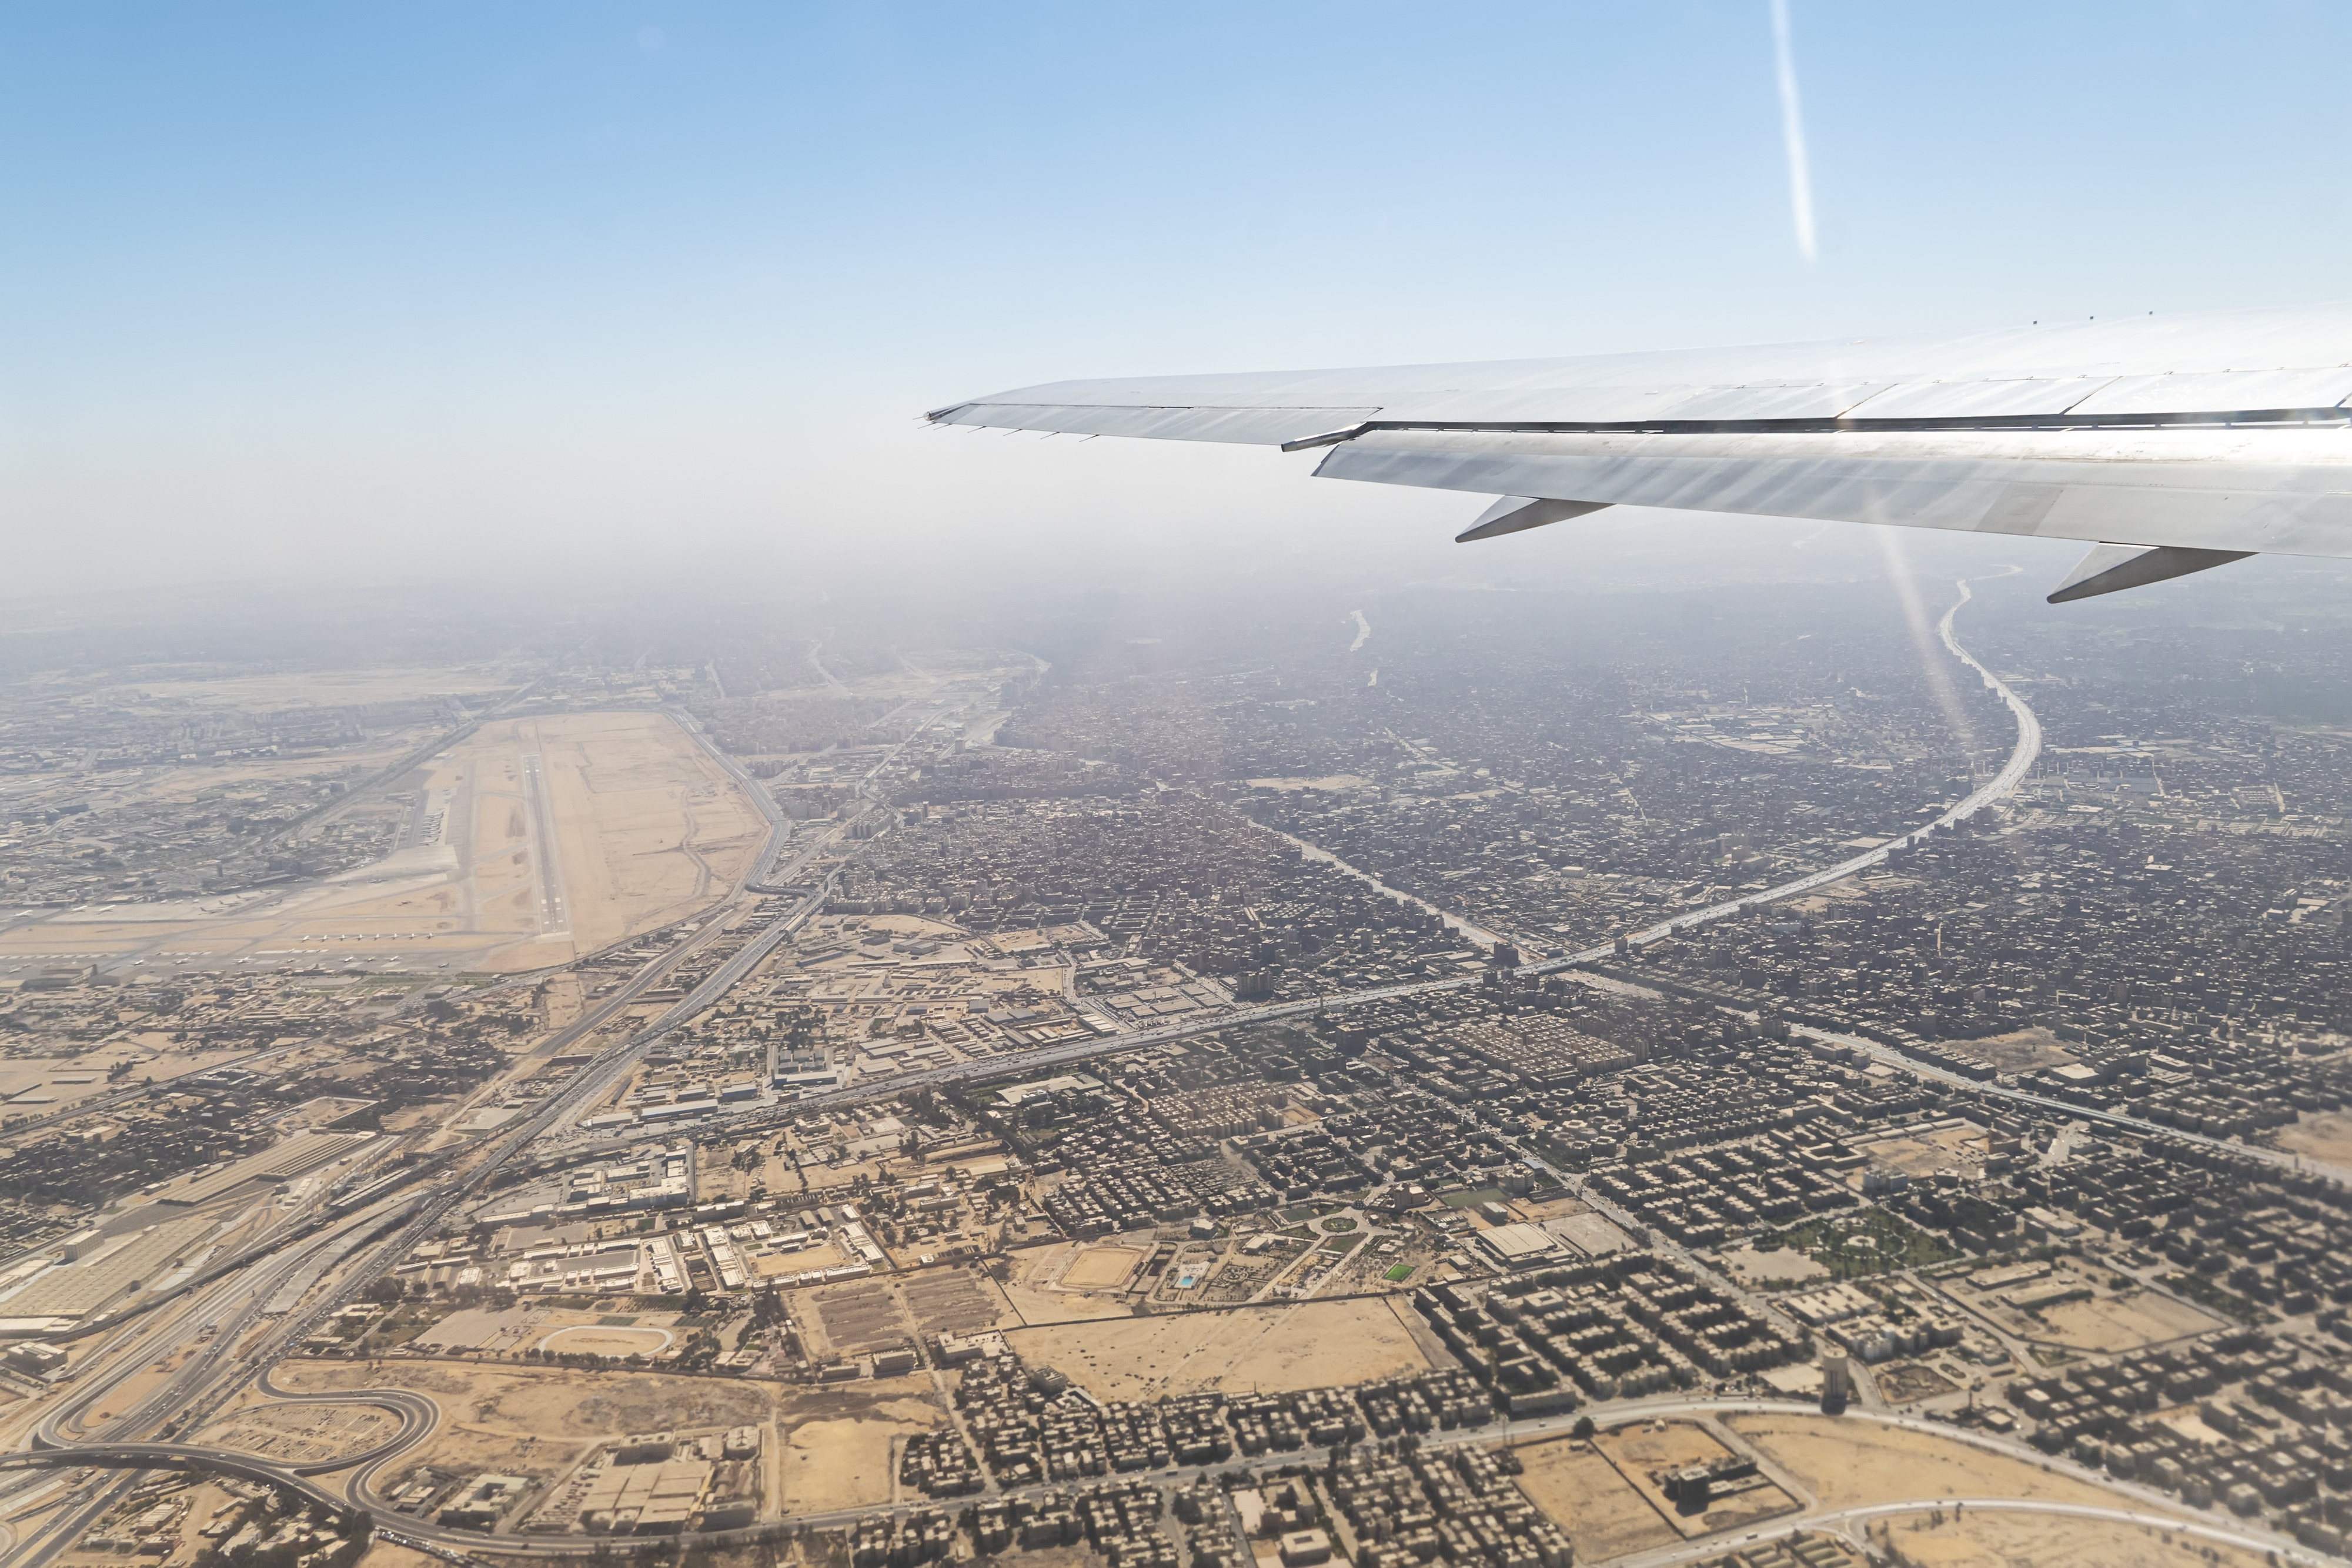 wing of a passenger plane against the background of Cairo